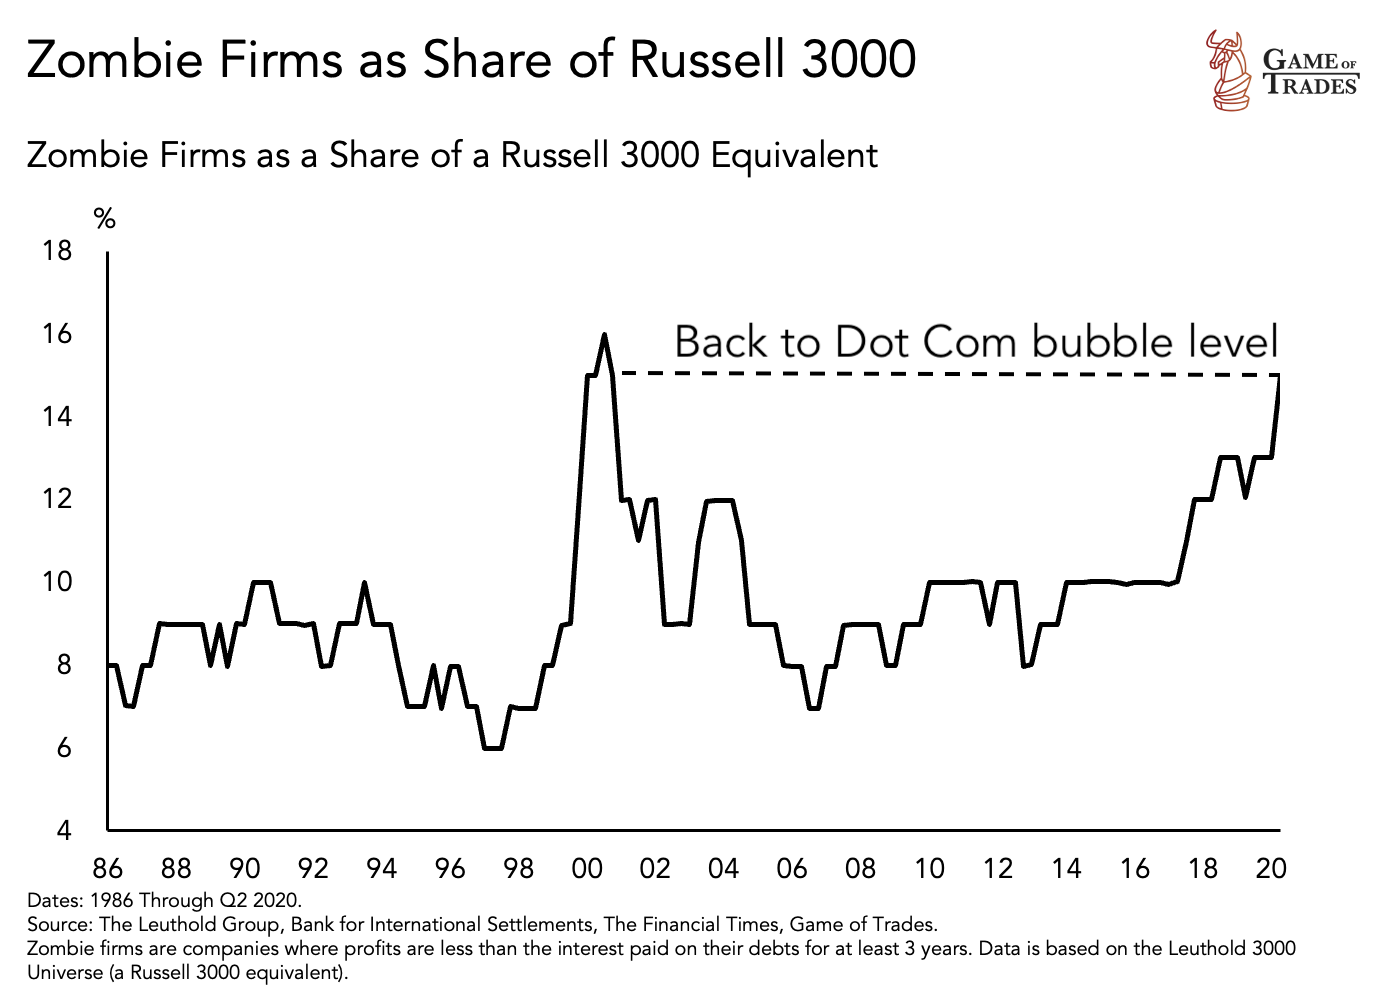 Zombie firms as share of Russell 3000